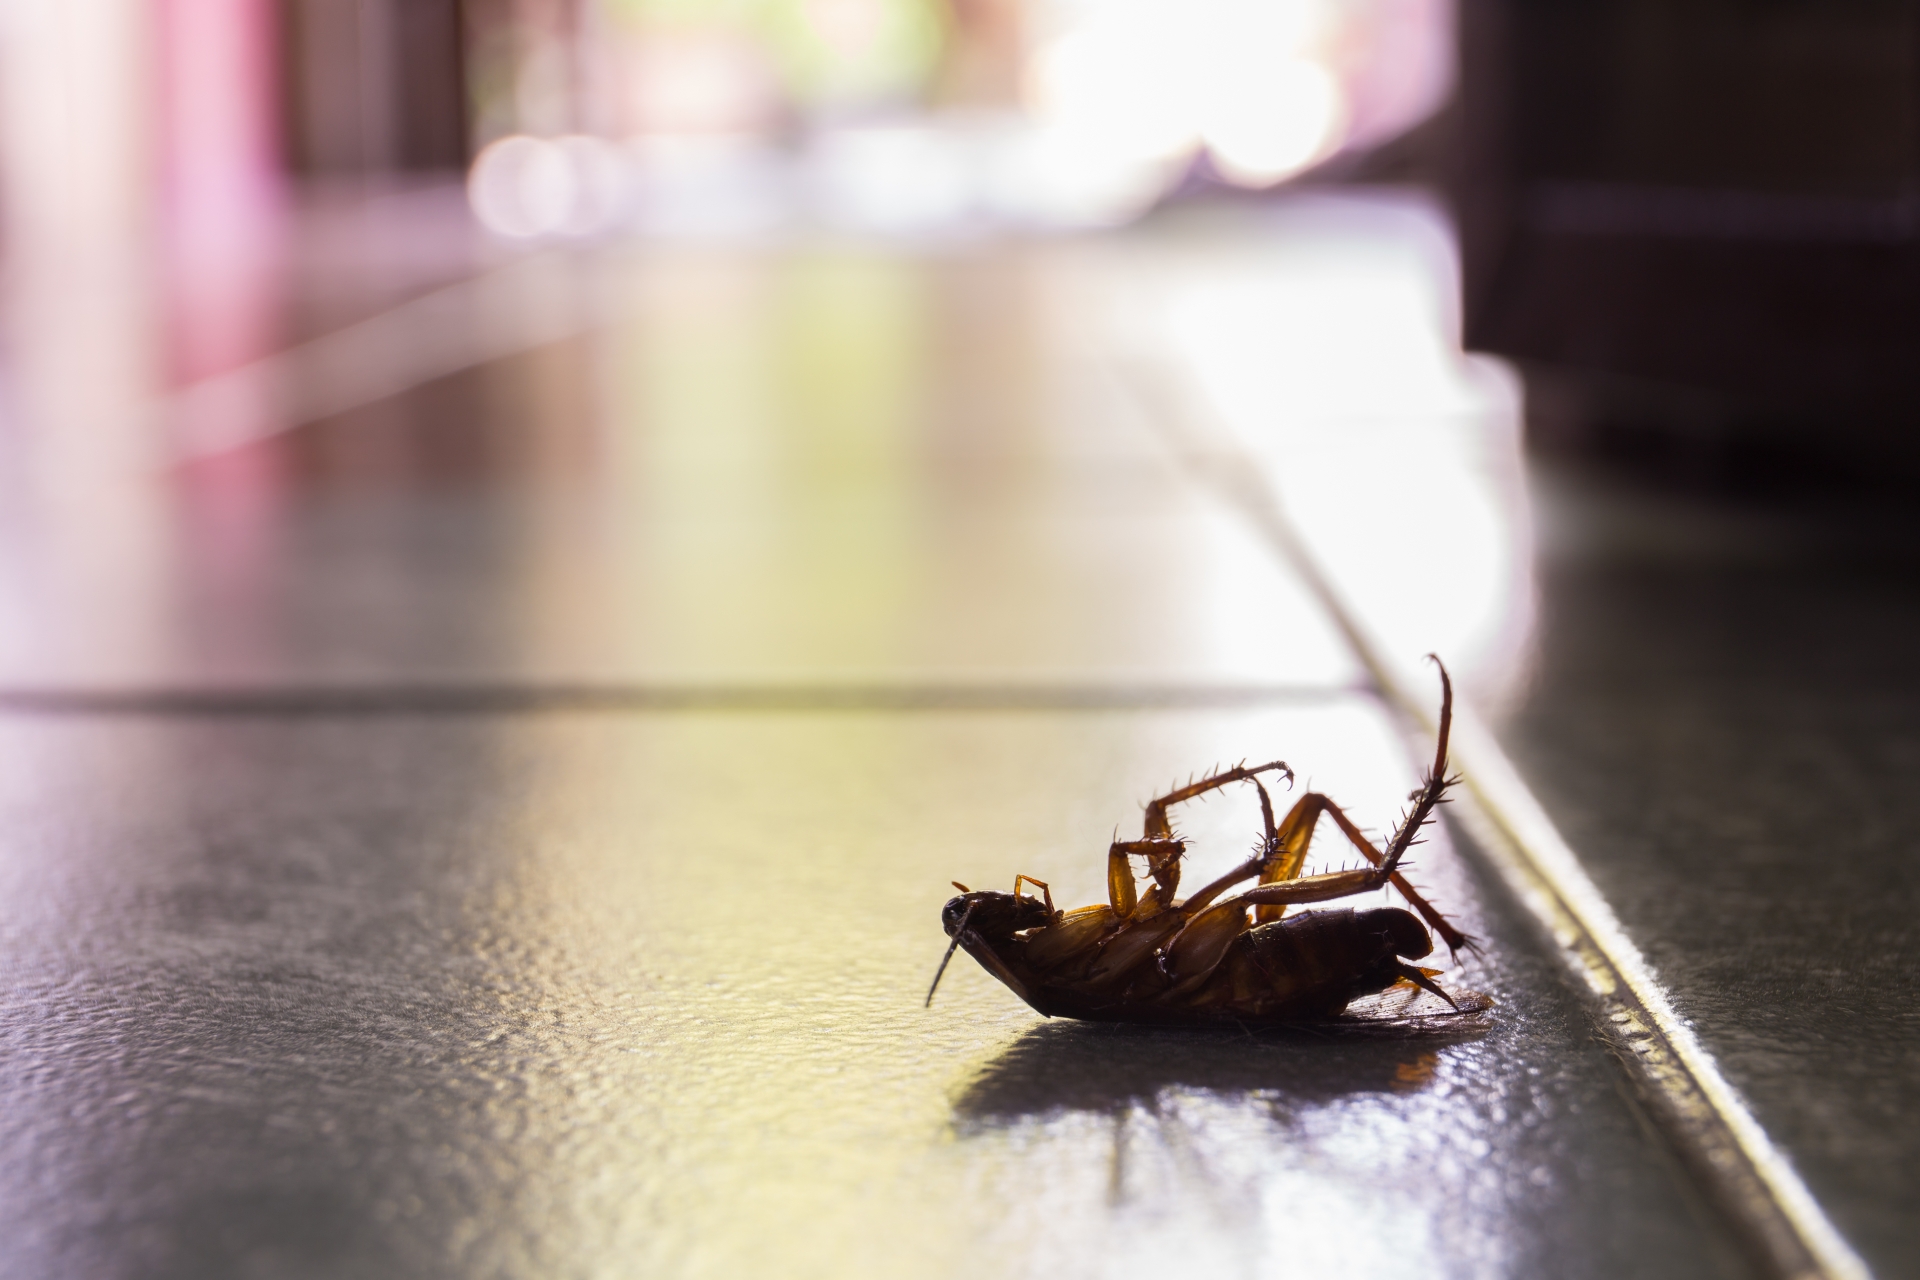 Cockroach Control, Pest Control in Hornsey, N8. Call Now 020 8166 9746